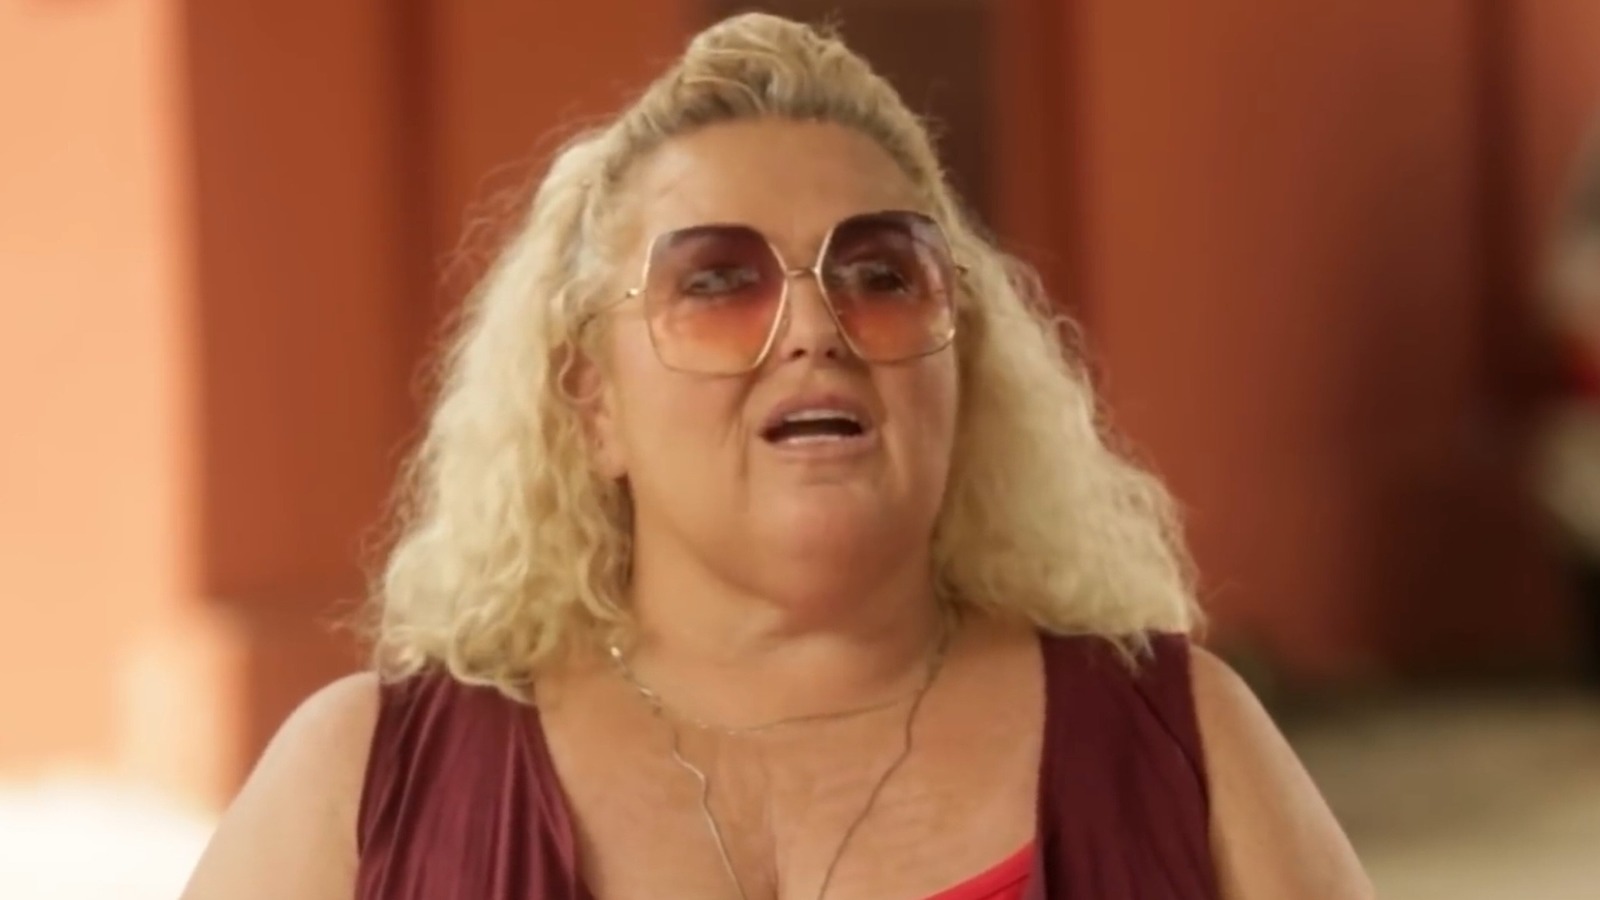 90 Day Fiance star Angela Deem debuted a new look during the Christmas 2020...